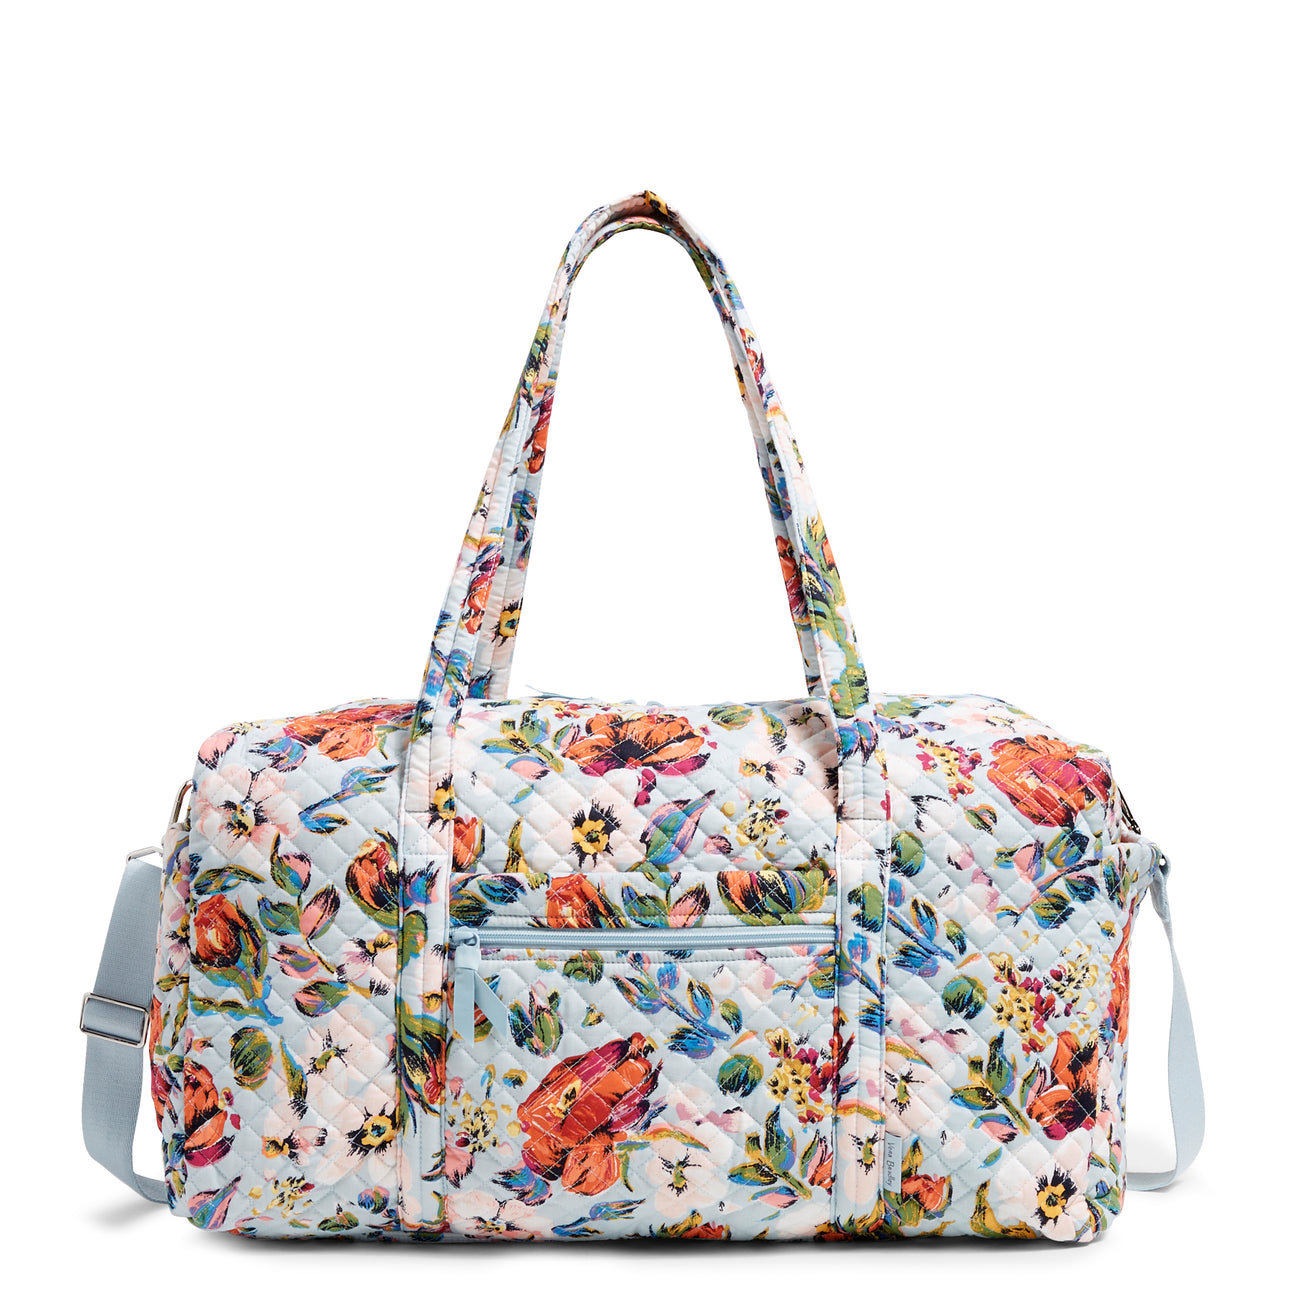 Large Travel Duffel Bag in Sea Air Floral pattern, full front view.